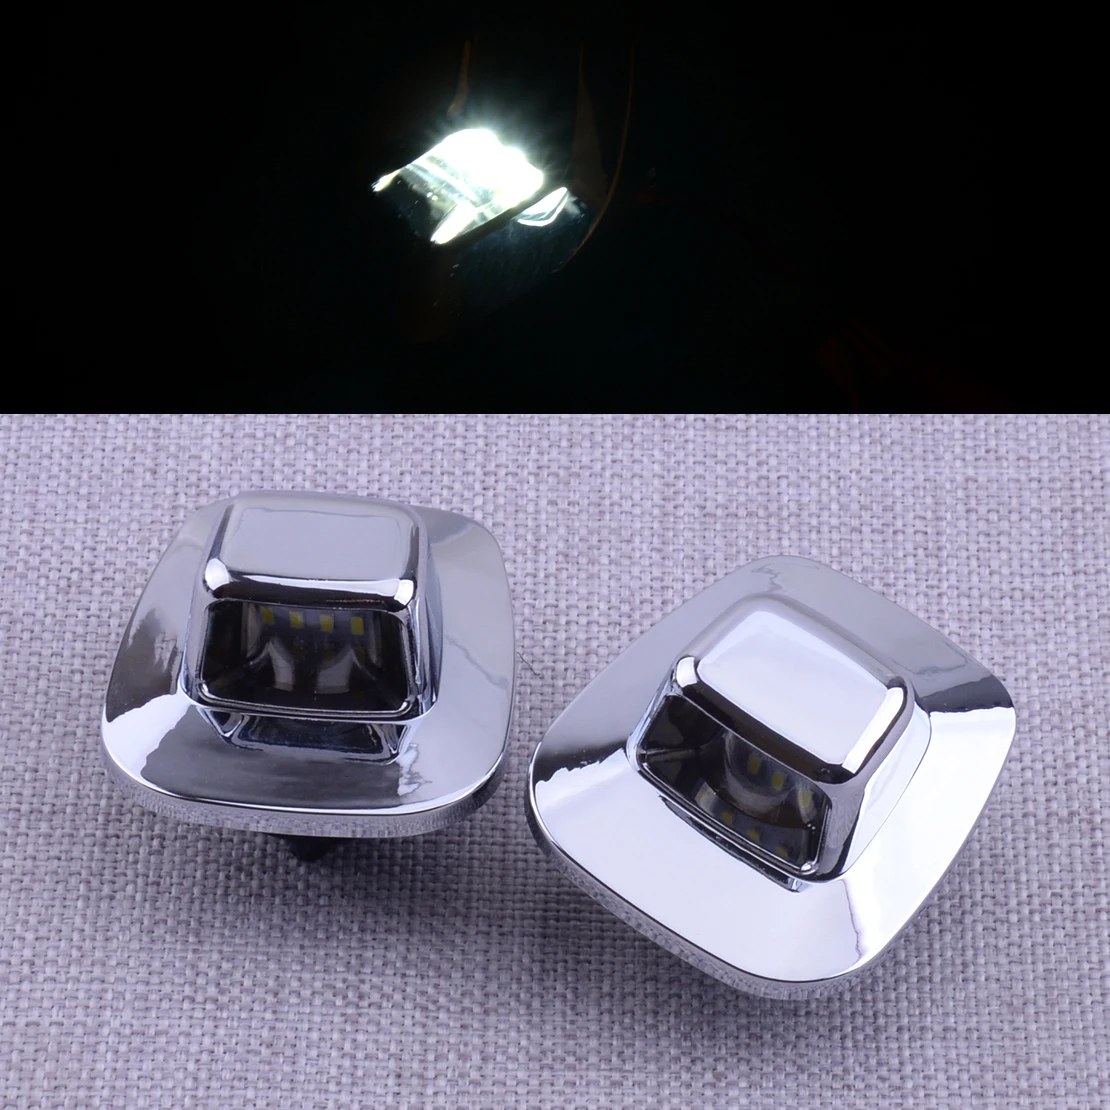 1 Pair Silver Housing LED License Plate Light Tag Lamp Fit for Chevrolet Chevy C K 1500 2500 3500 1988-2000 918399 916438 A8588G